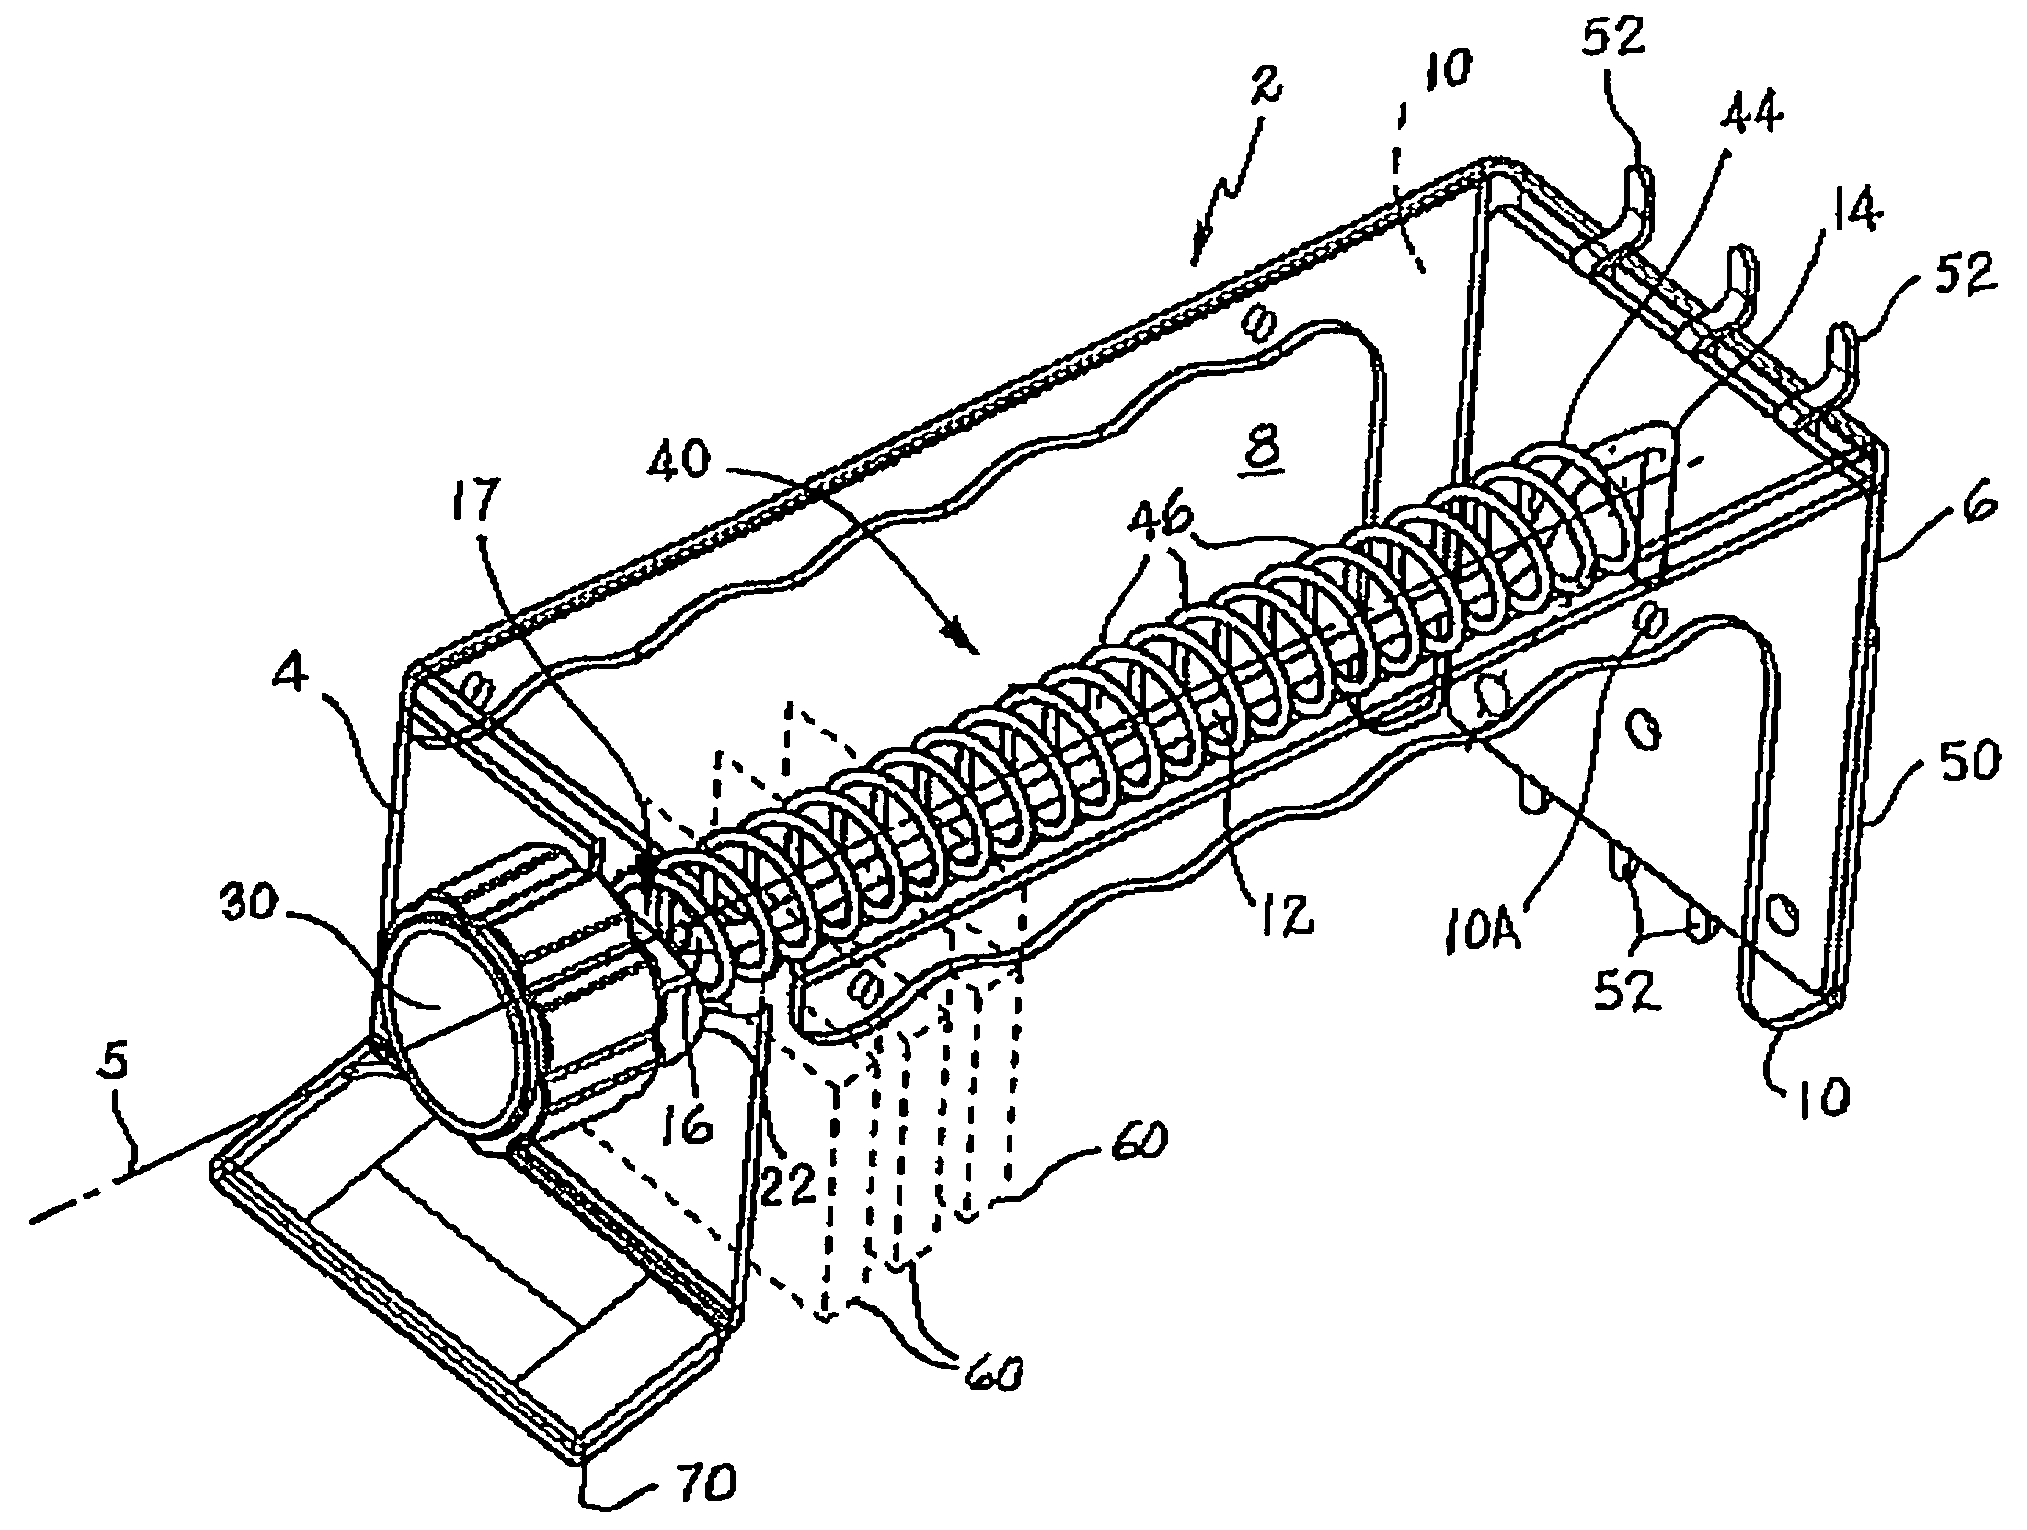 Merchandise dispenser with coil actuation